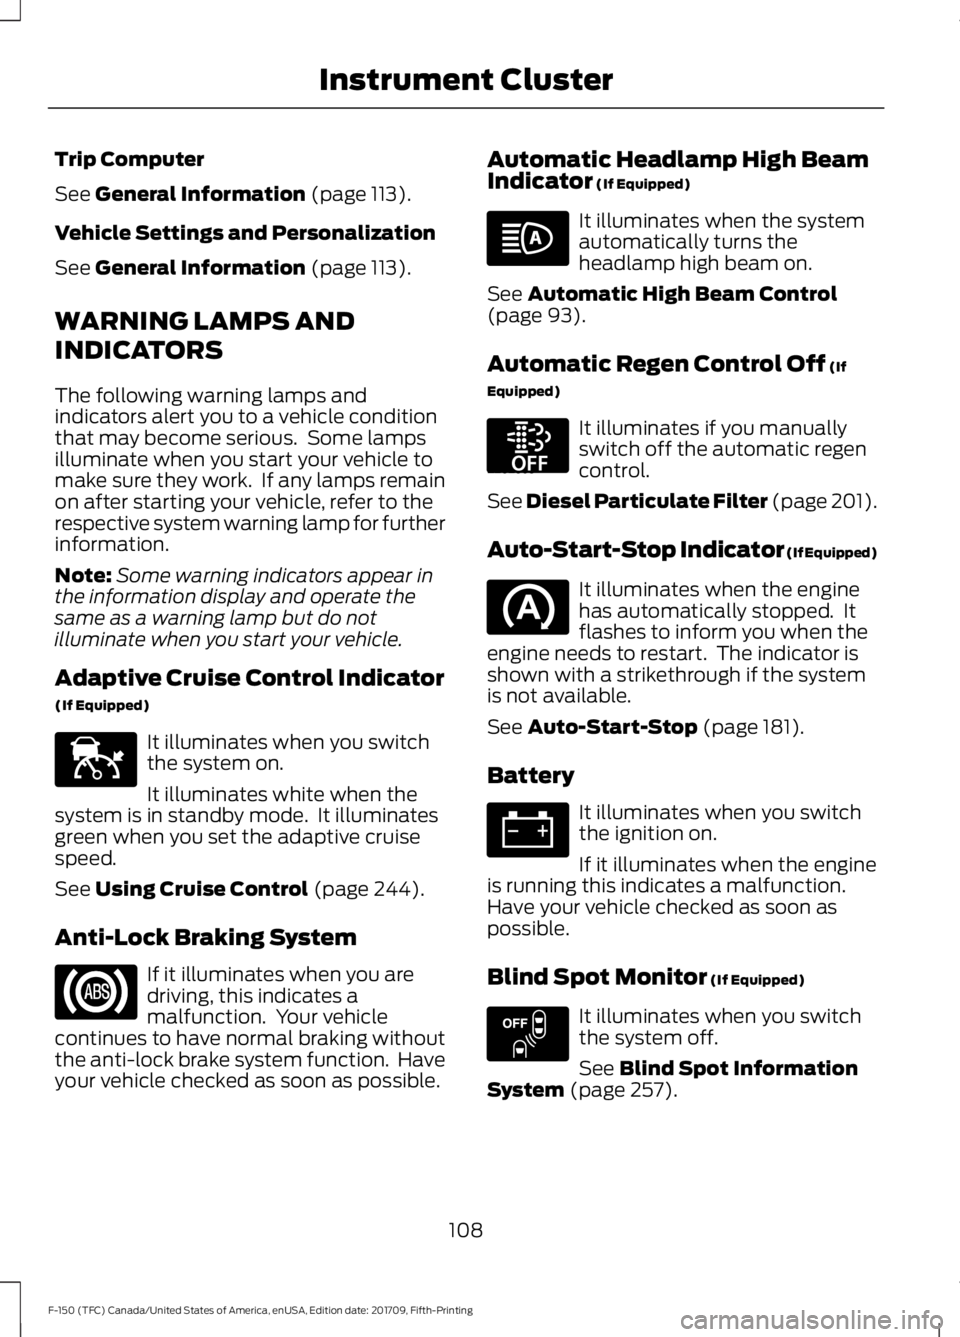 FORD F-150 2018  Owners Manual Trip Computer
See General Information (page 113).
Vehicle Settings and Personalization
See 
General Information (page 113).
WARNING LAMPS AND
INDICATORS
The following warning lamps and
indicators aler